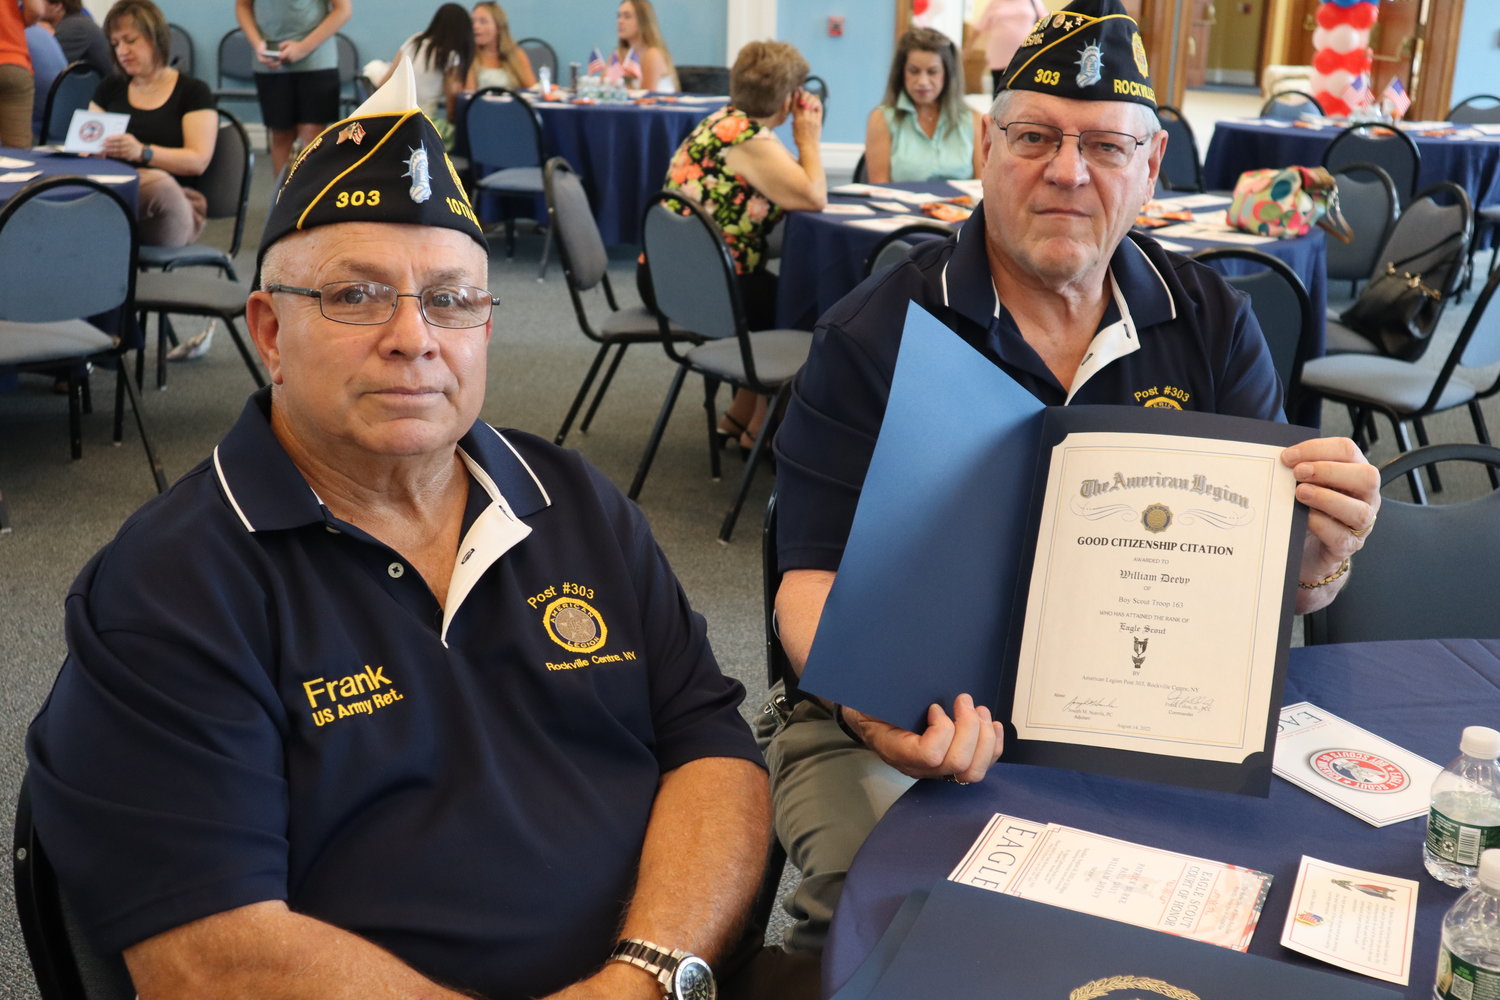 American Legion District Commander Frank Colon and Joseph M. Scarola presented the Eagle Scouts with the Good Citizenship Citation, on behalf of Post 303 in Rockville Centre.